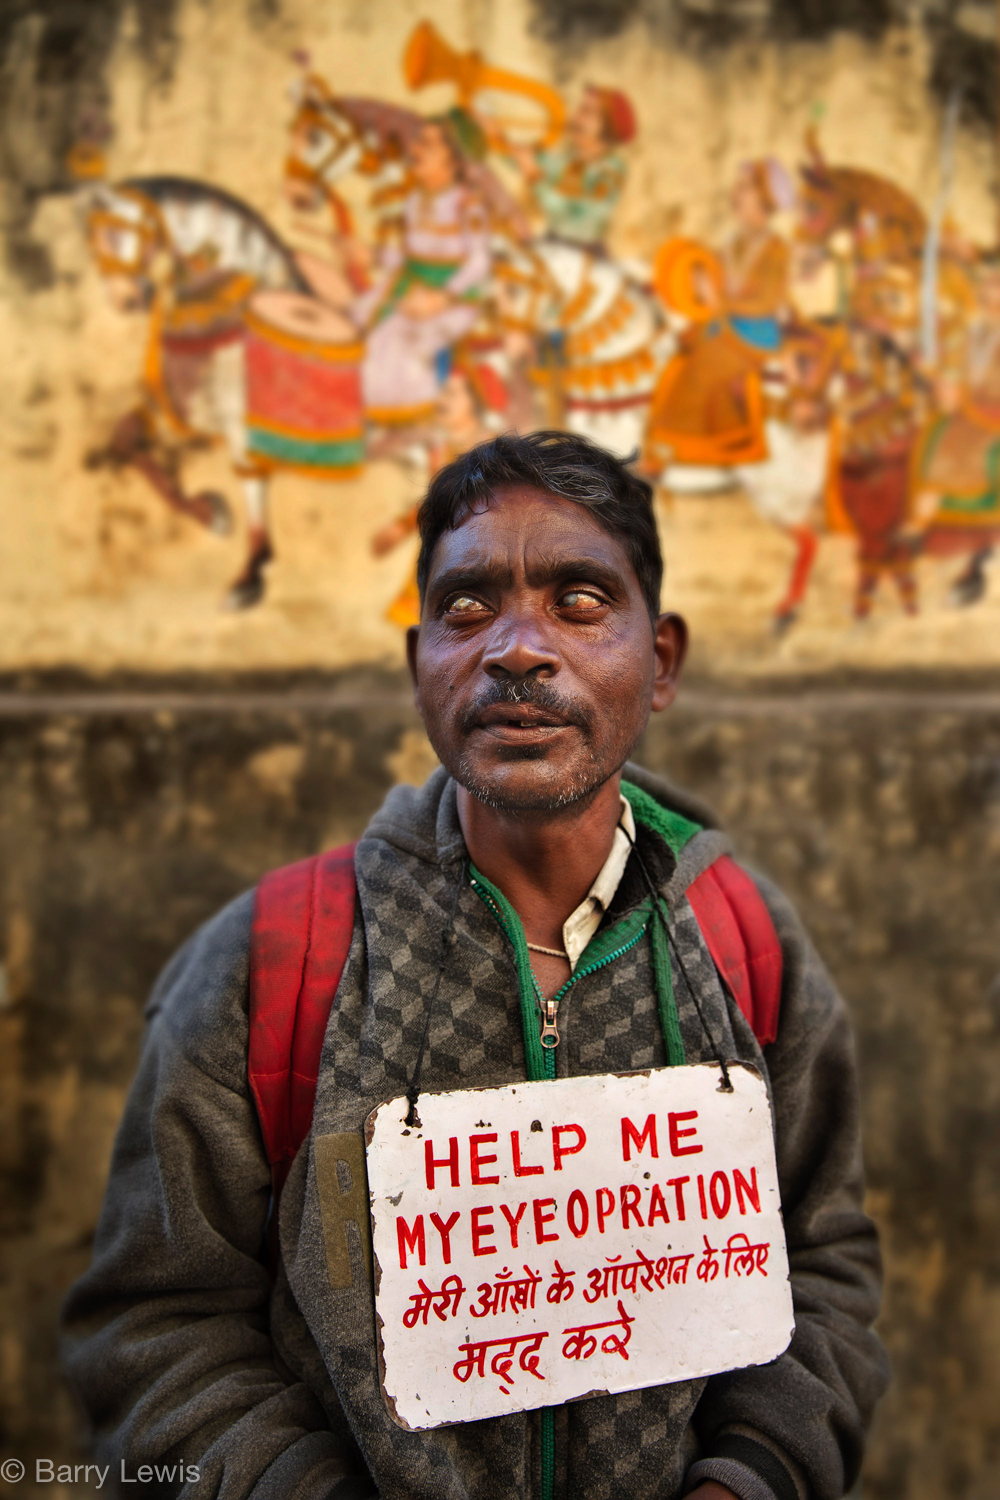  Blind man, raising money for an operation, Udaipur, India, 2018 